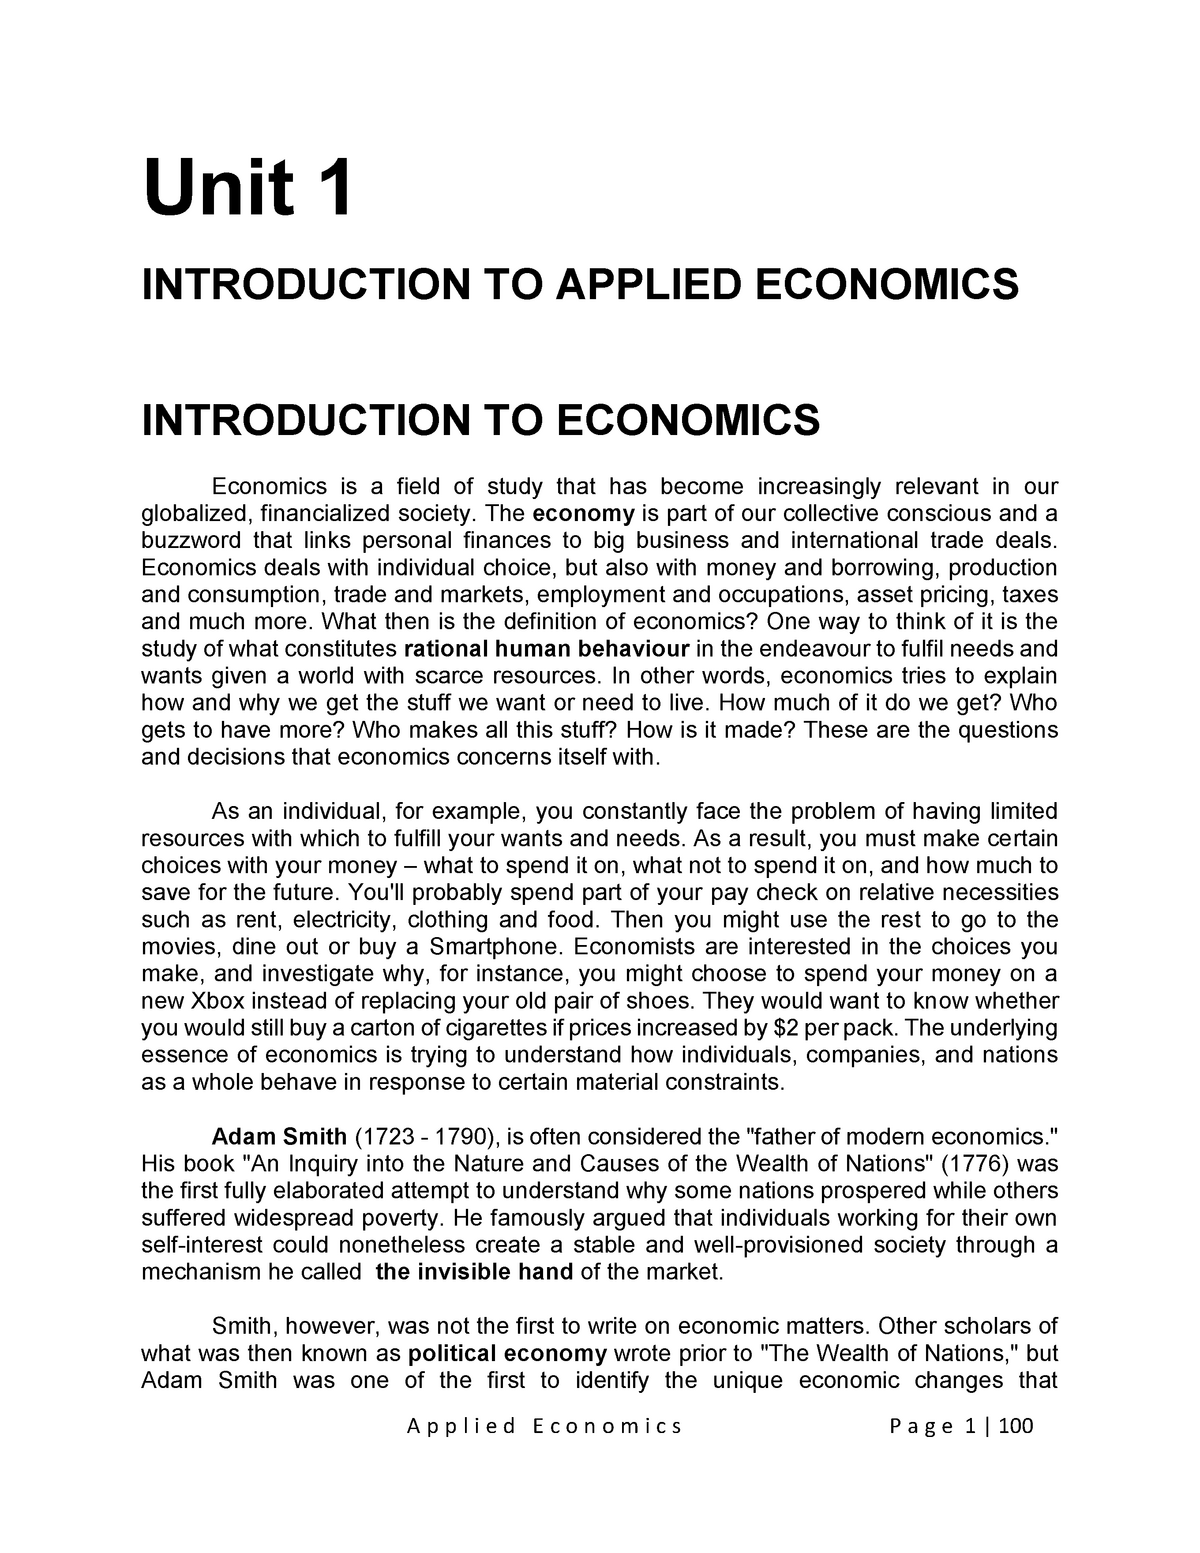 how can applied economics solve real world problems essay